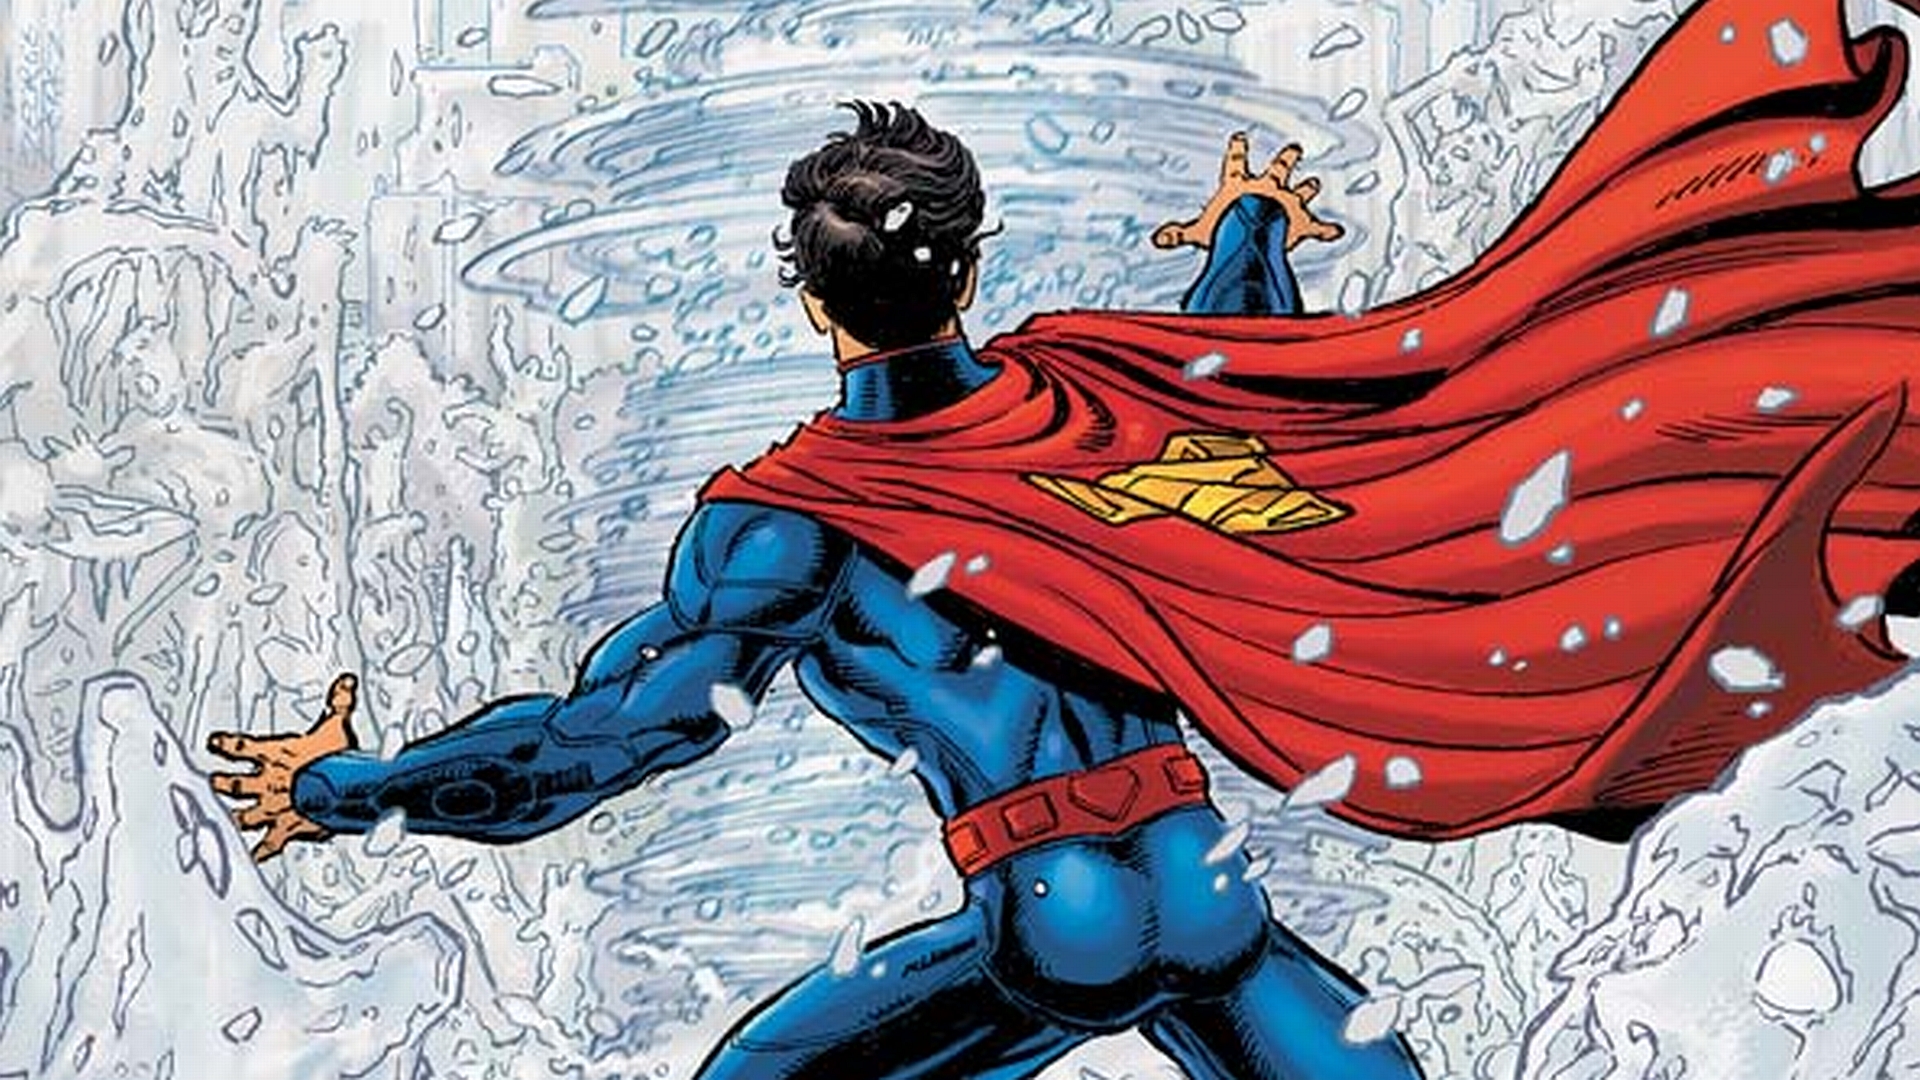 Superman flying with vibrant comic book-style background.